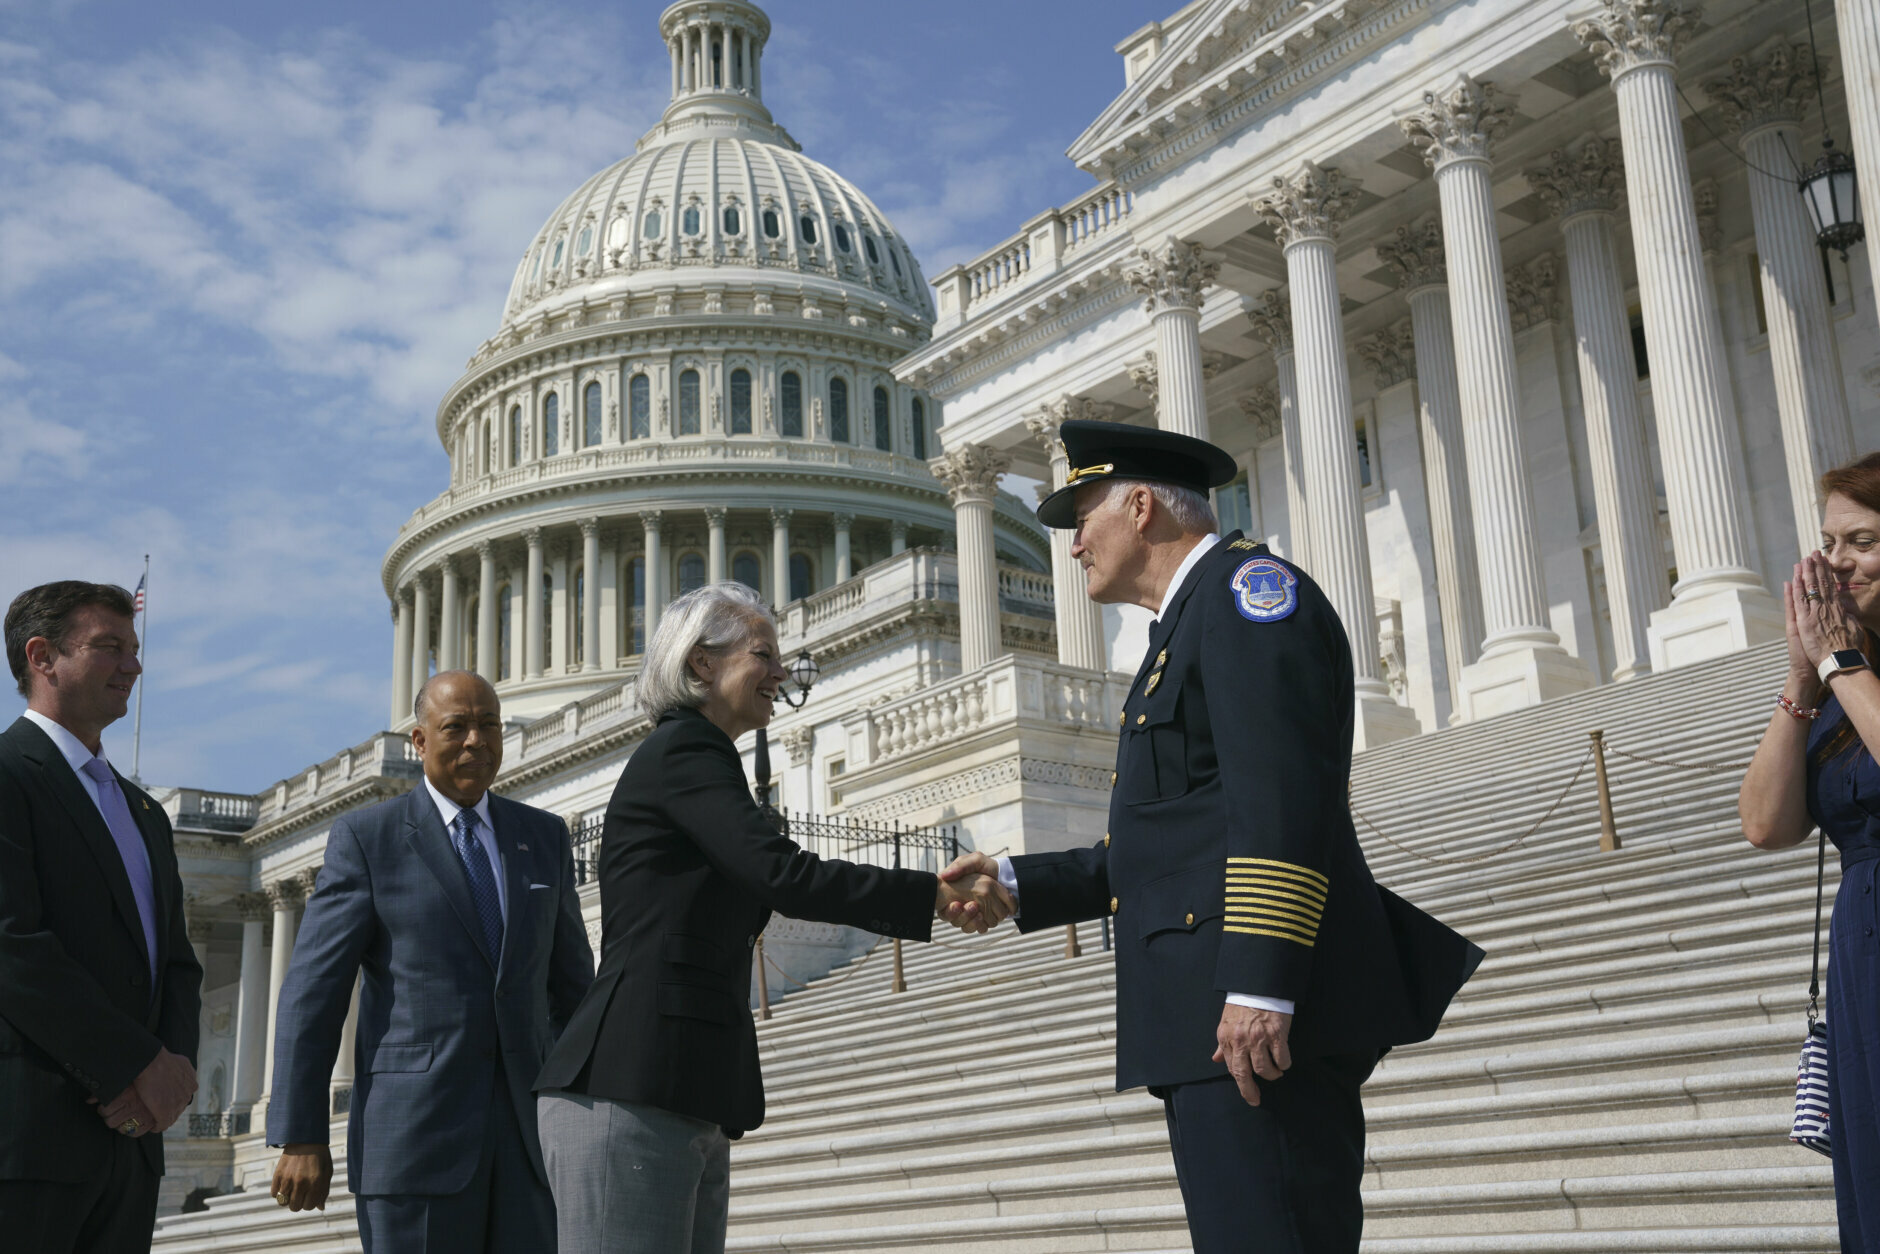 J. Thomas Manger, right, a veteran police chief of departments in the Washington, D.C., region, is welcomed by Senate Sergeant at Arms Karen Gibson to the Capitol in Washington, Friday, July 23, 2021. Manger takes over the United States Capitol Police following the resignations of the previous leadership after the Jan. 6 insurrection. (AP Photo/J. Scott Applewhite)